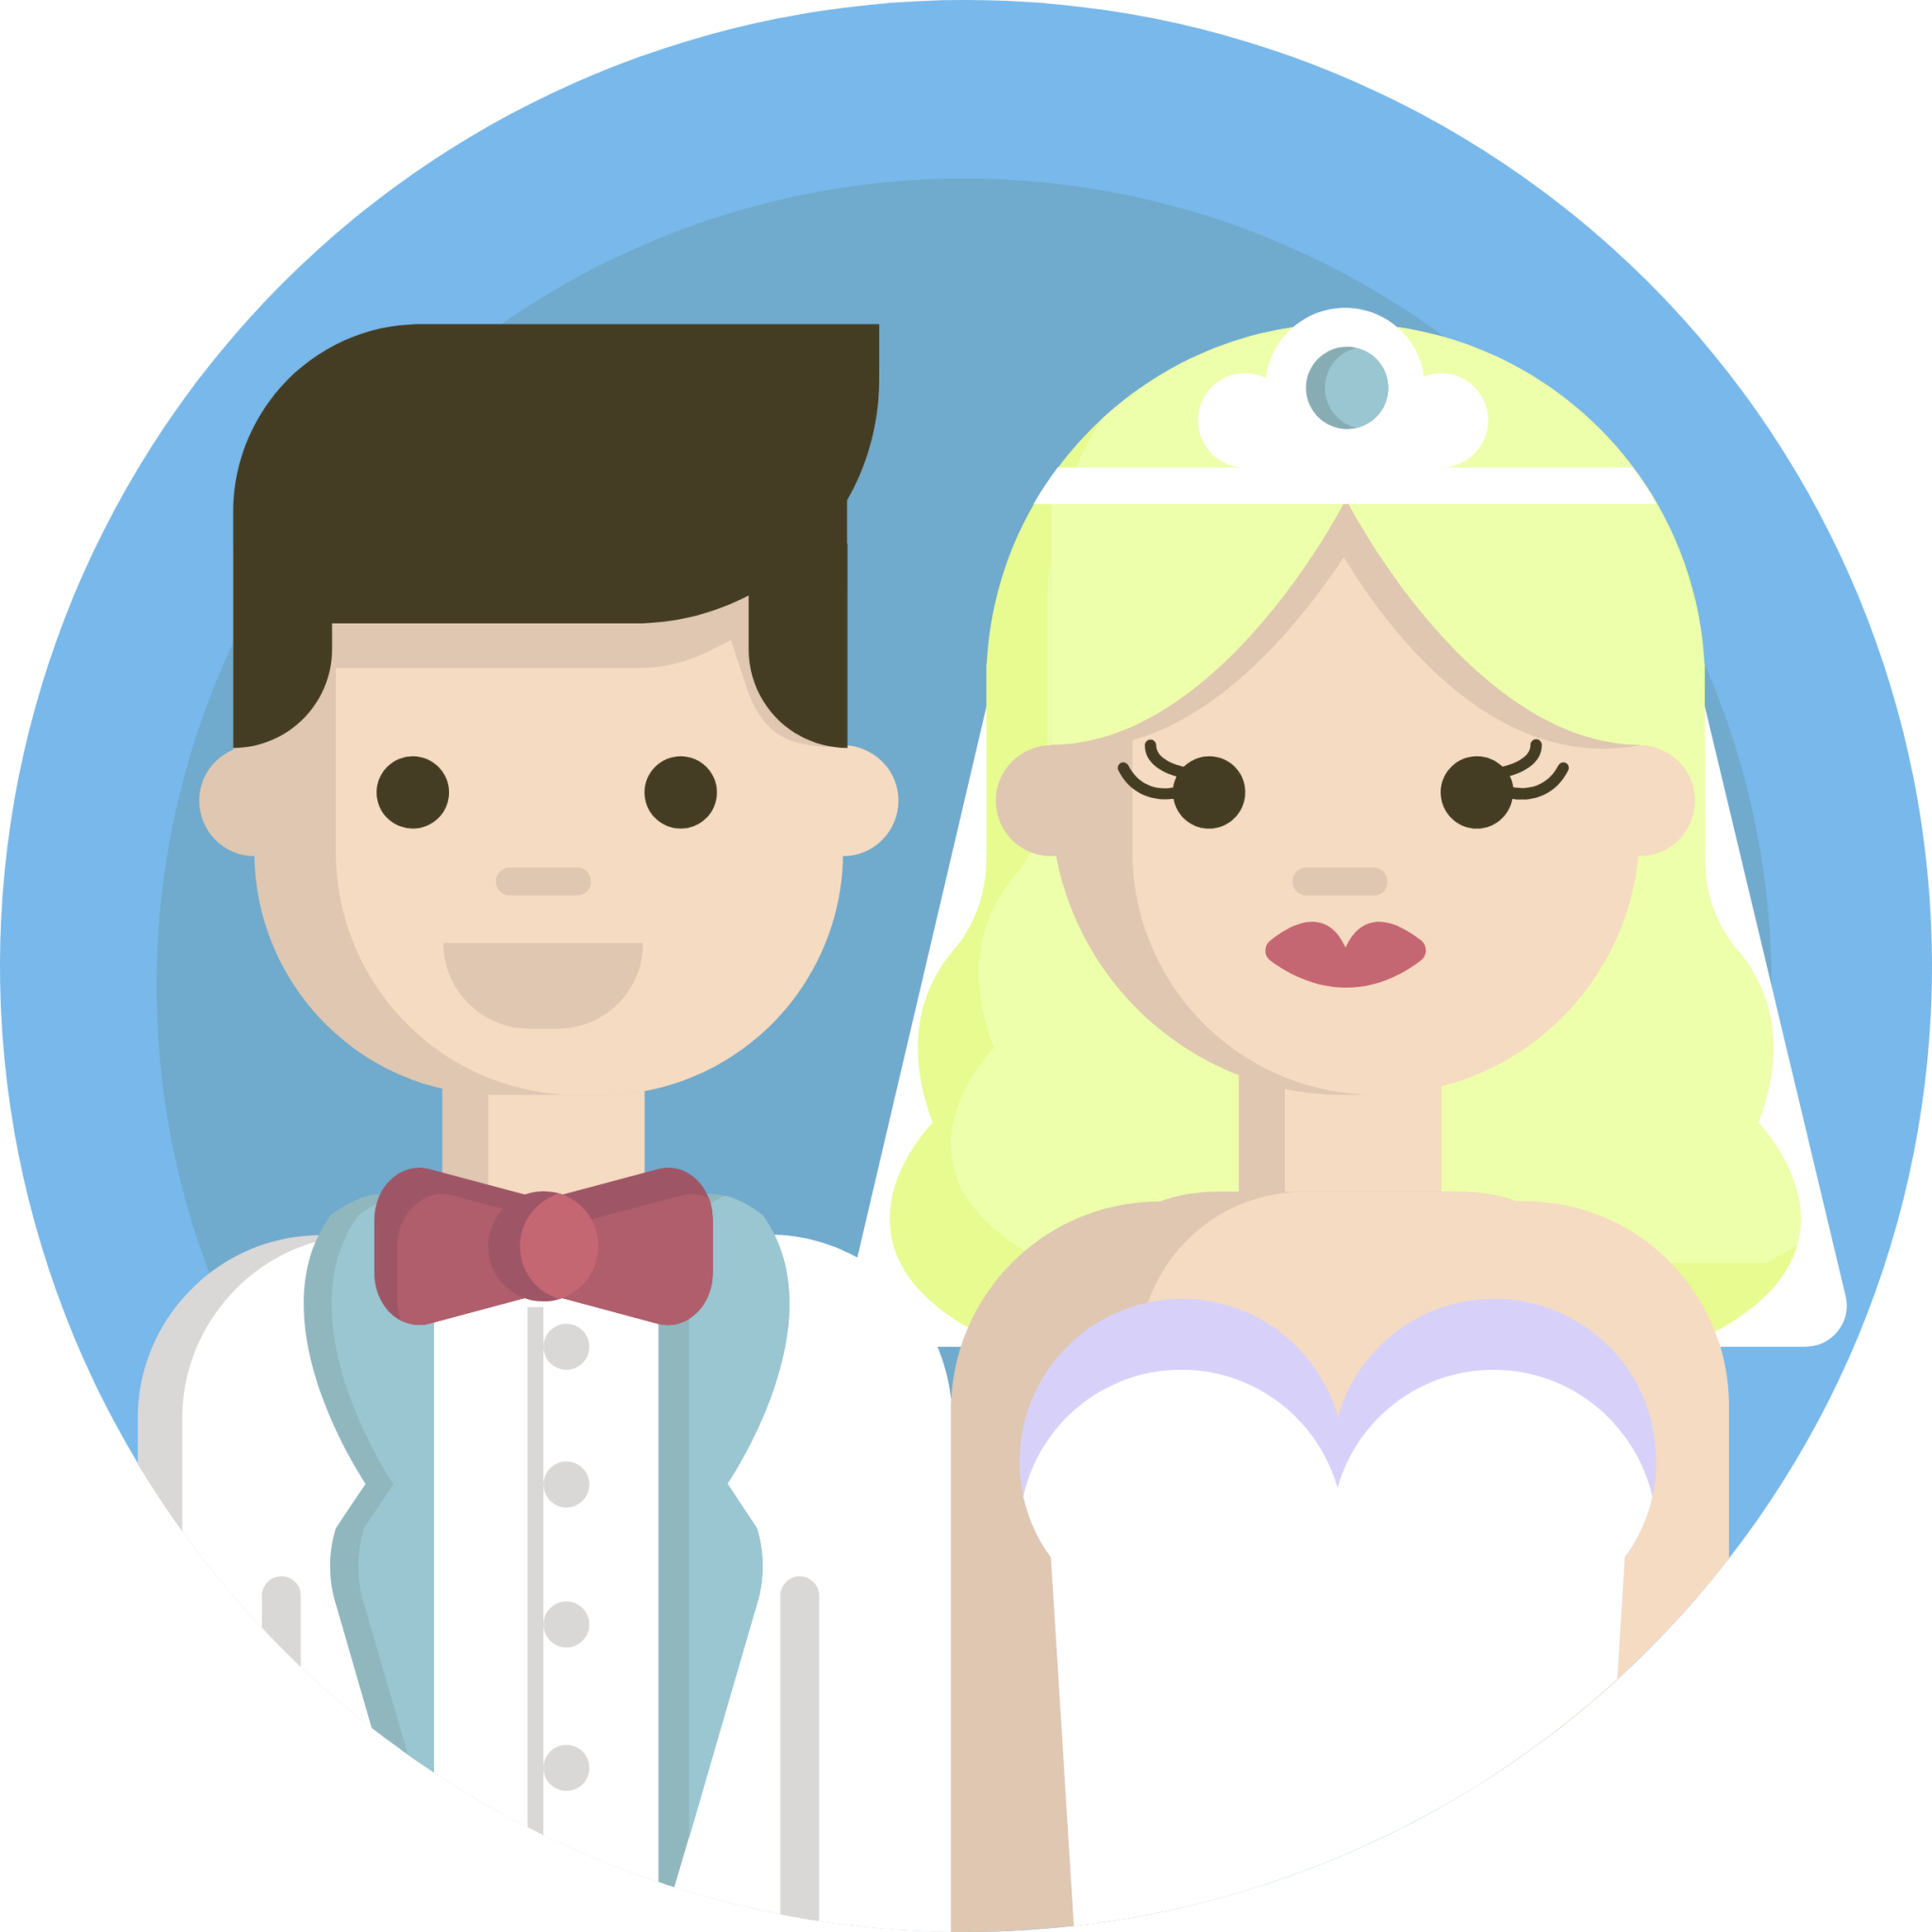 bride and groom icon